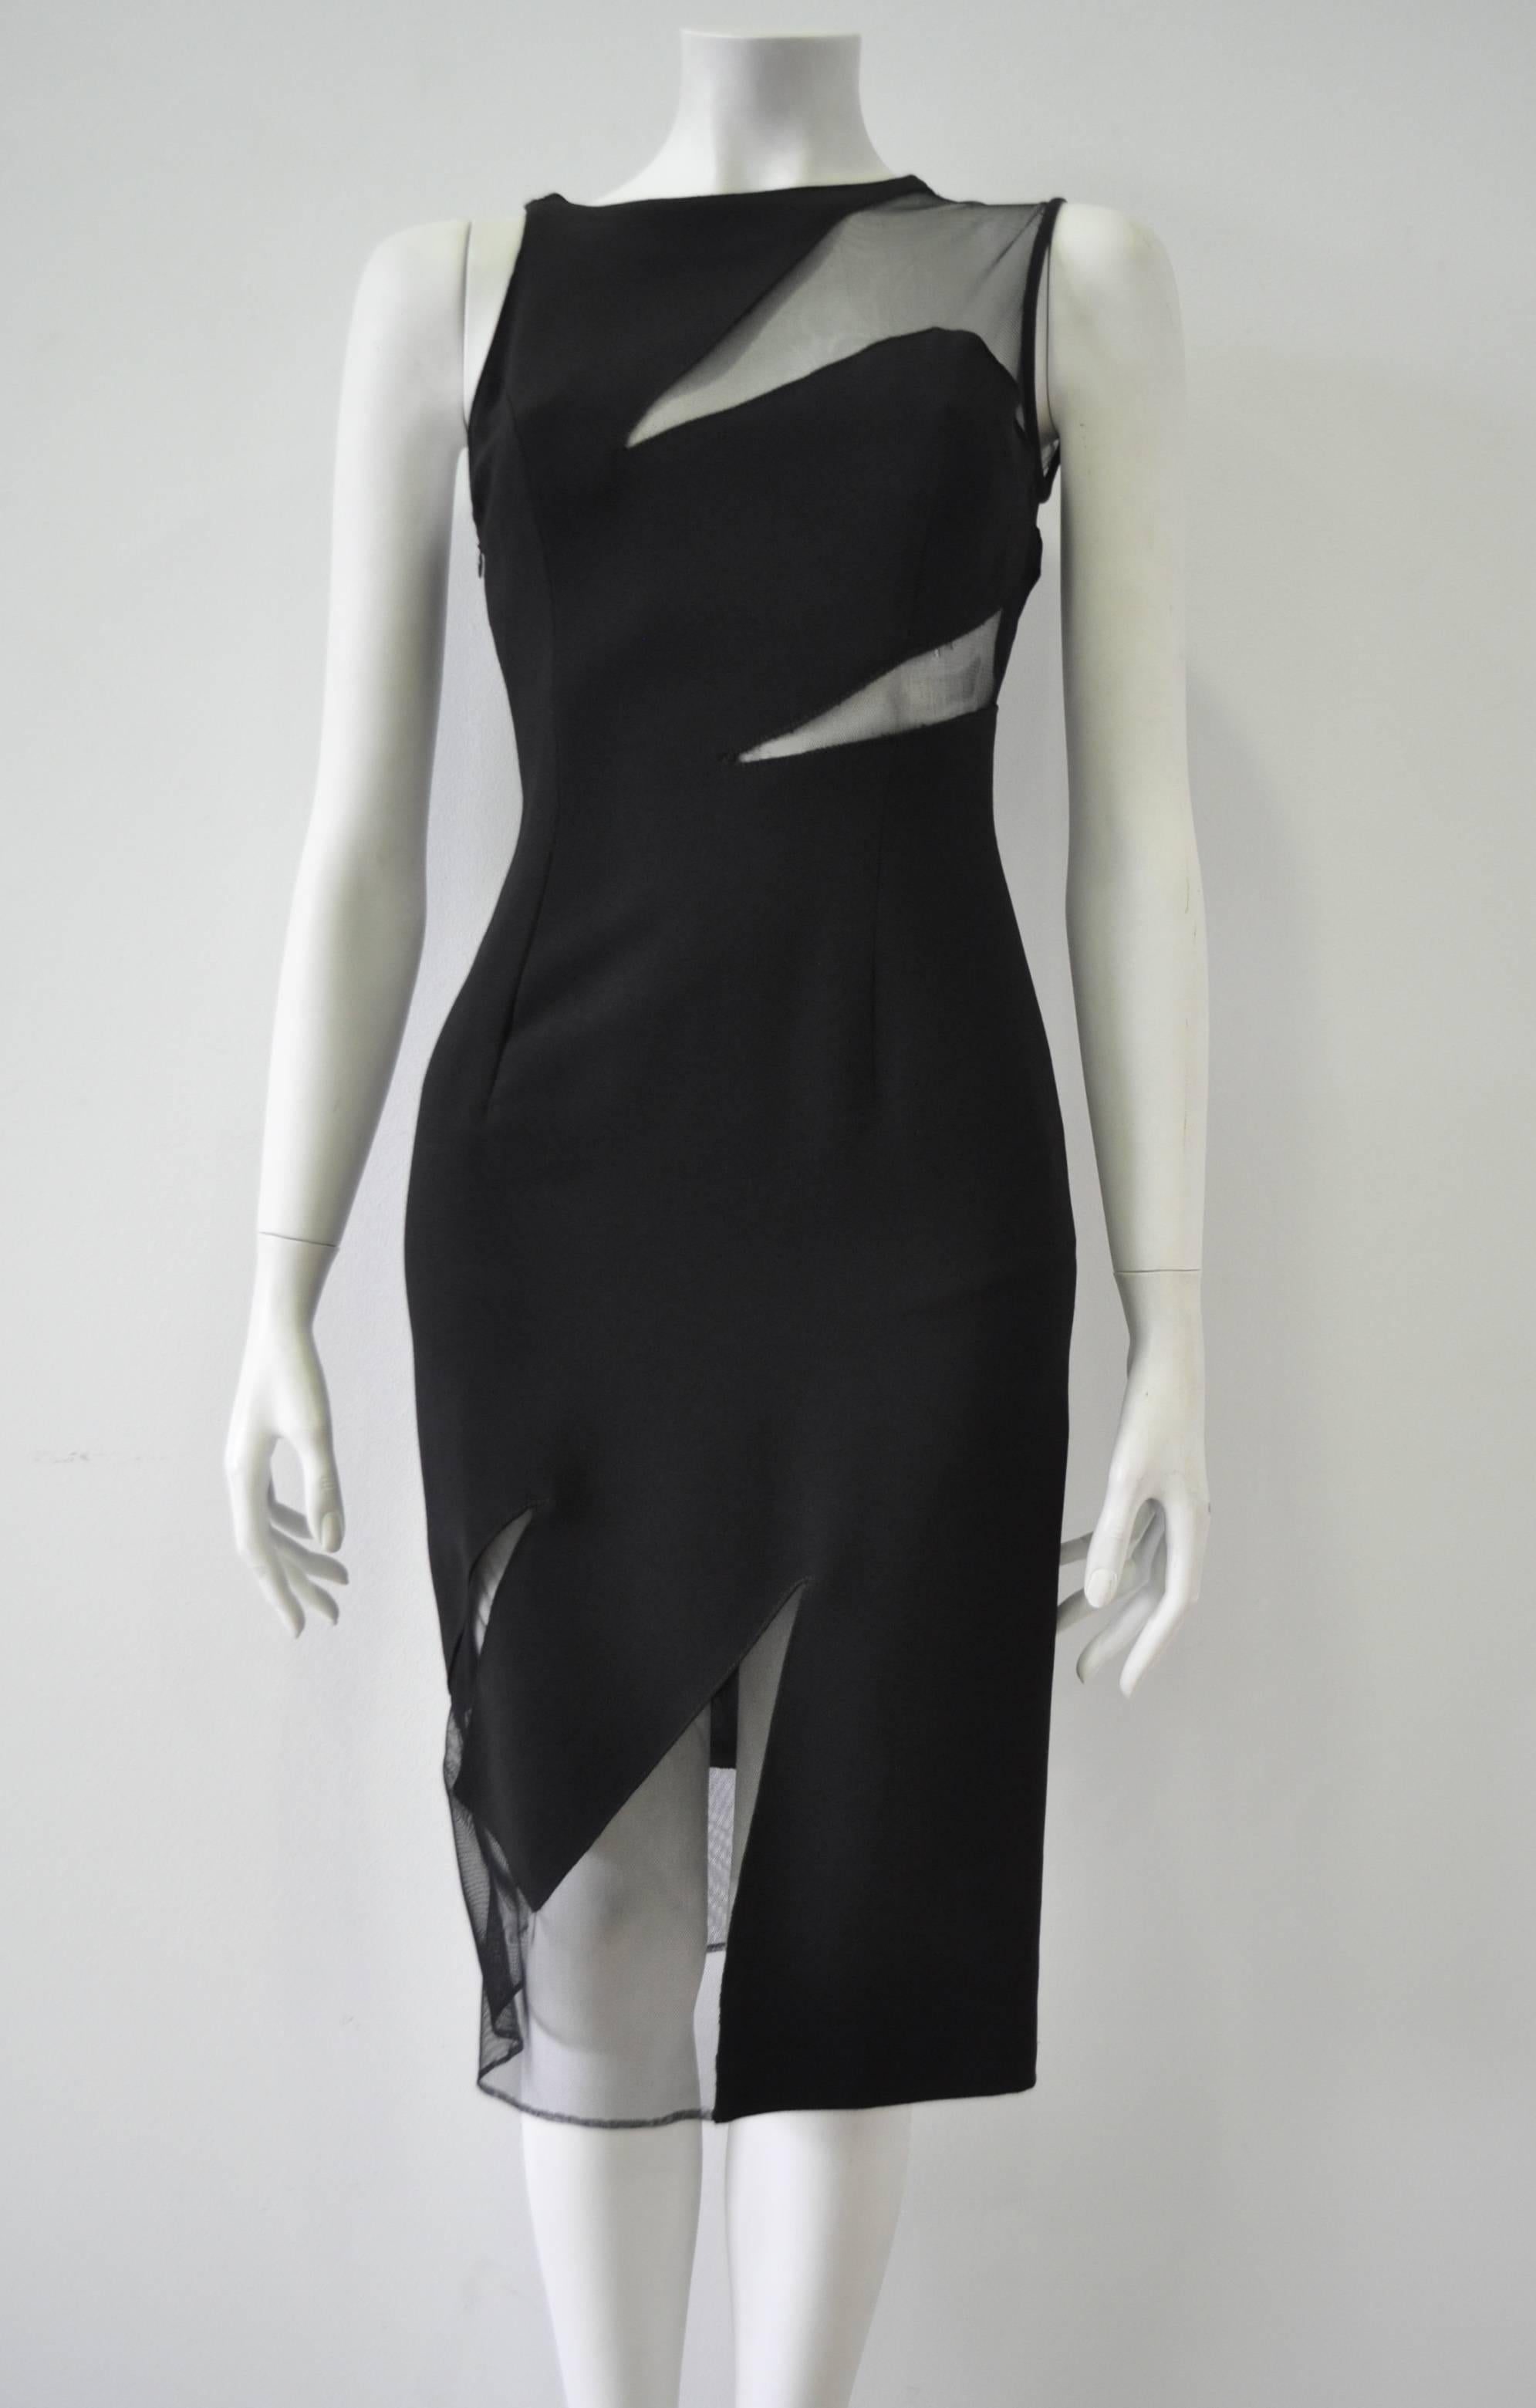 Daring Angelo Mozzillo Cut-Out Sheer Black Bodycon Dress In New Condition For Sale In Athens, Agia Paraskevi